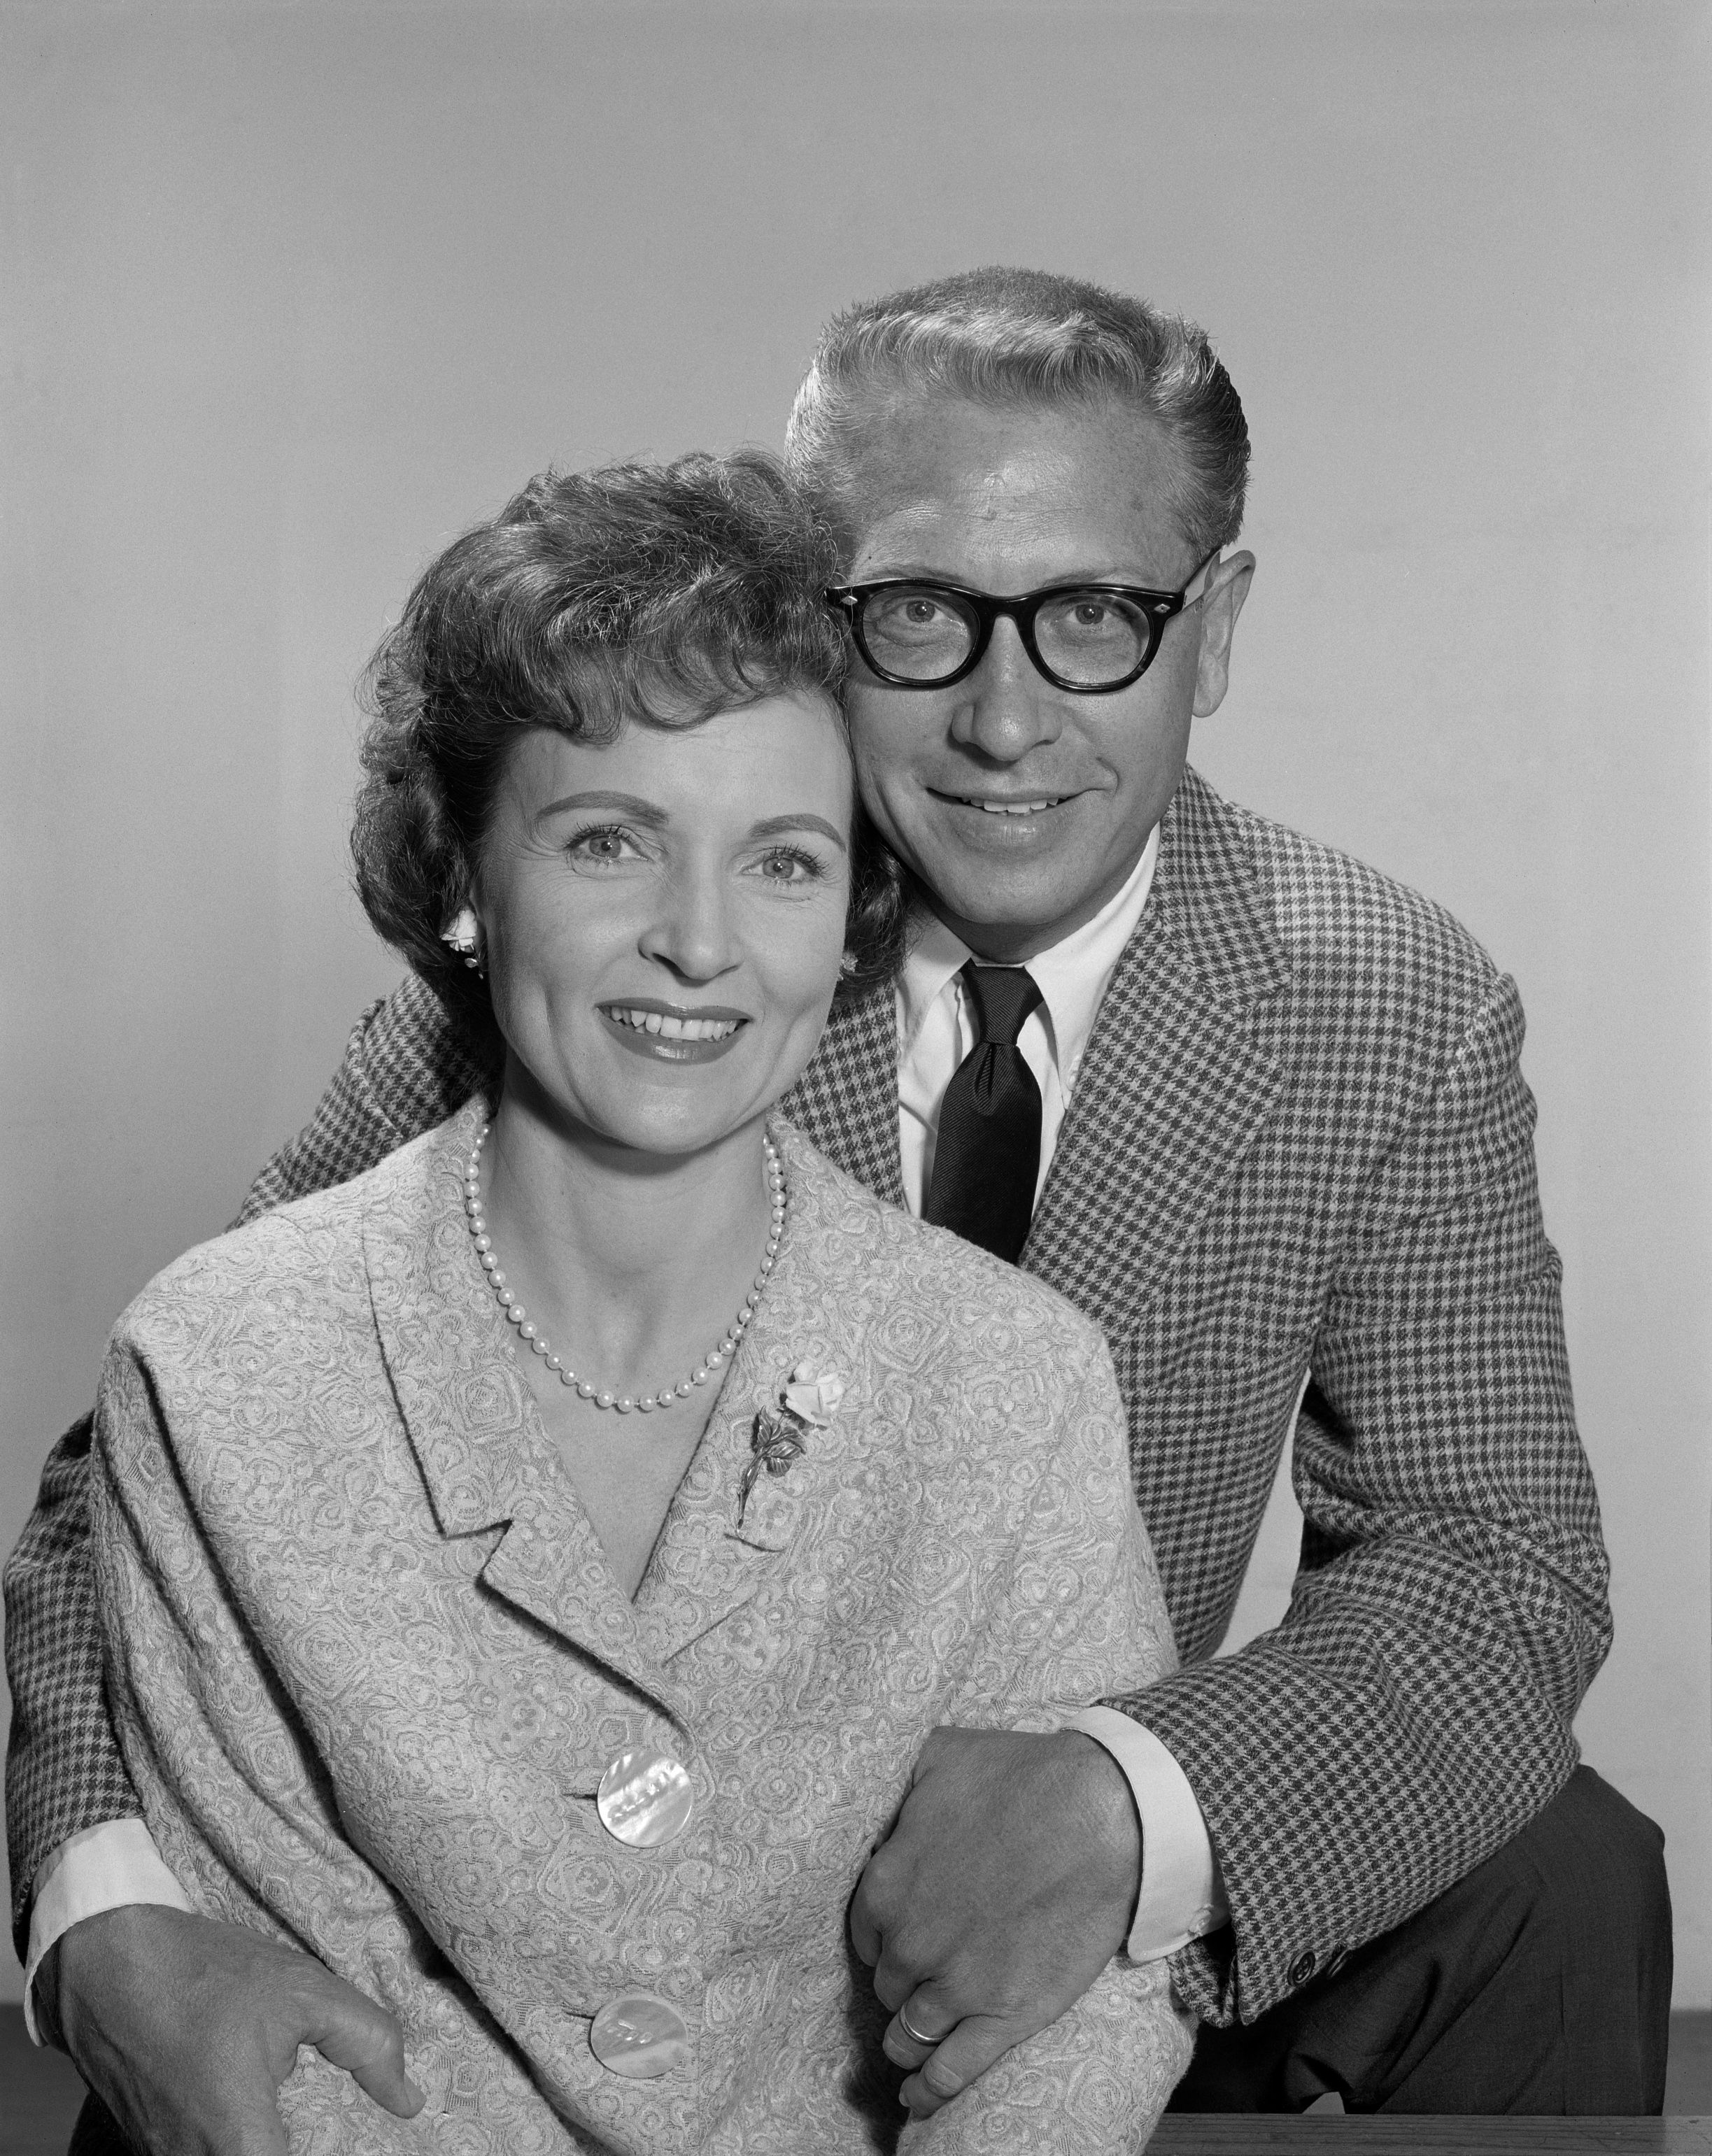 betty-white-and-allen-ludden-for-password-image-dated-june-news-photo-106670843-1546282930.jpg